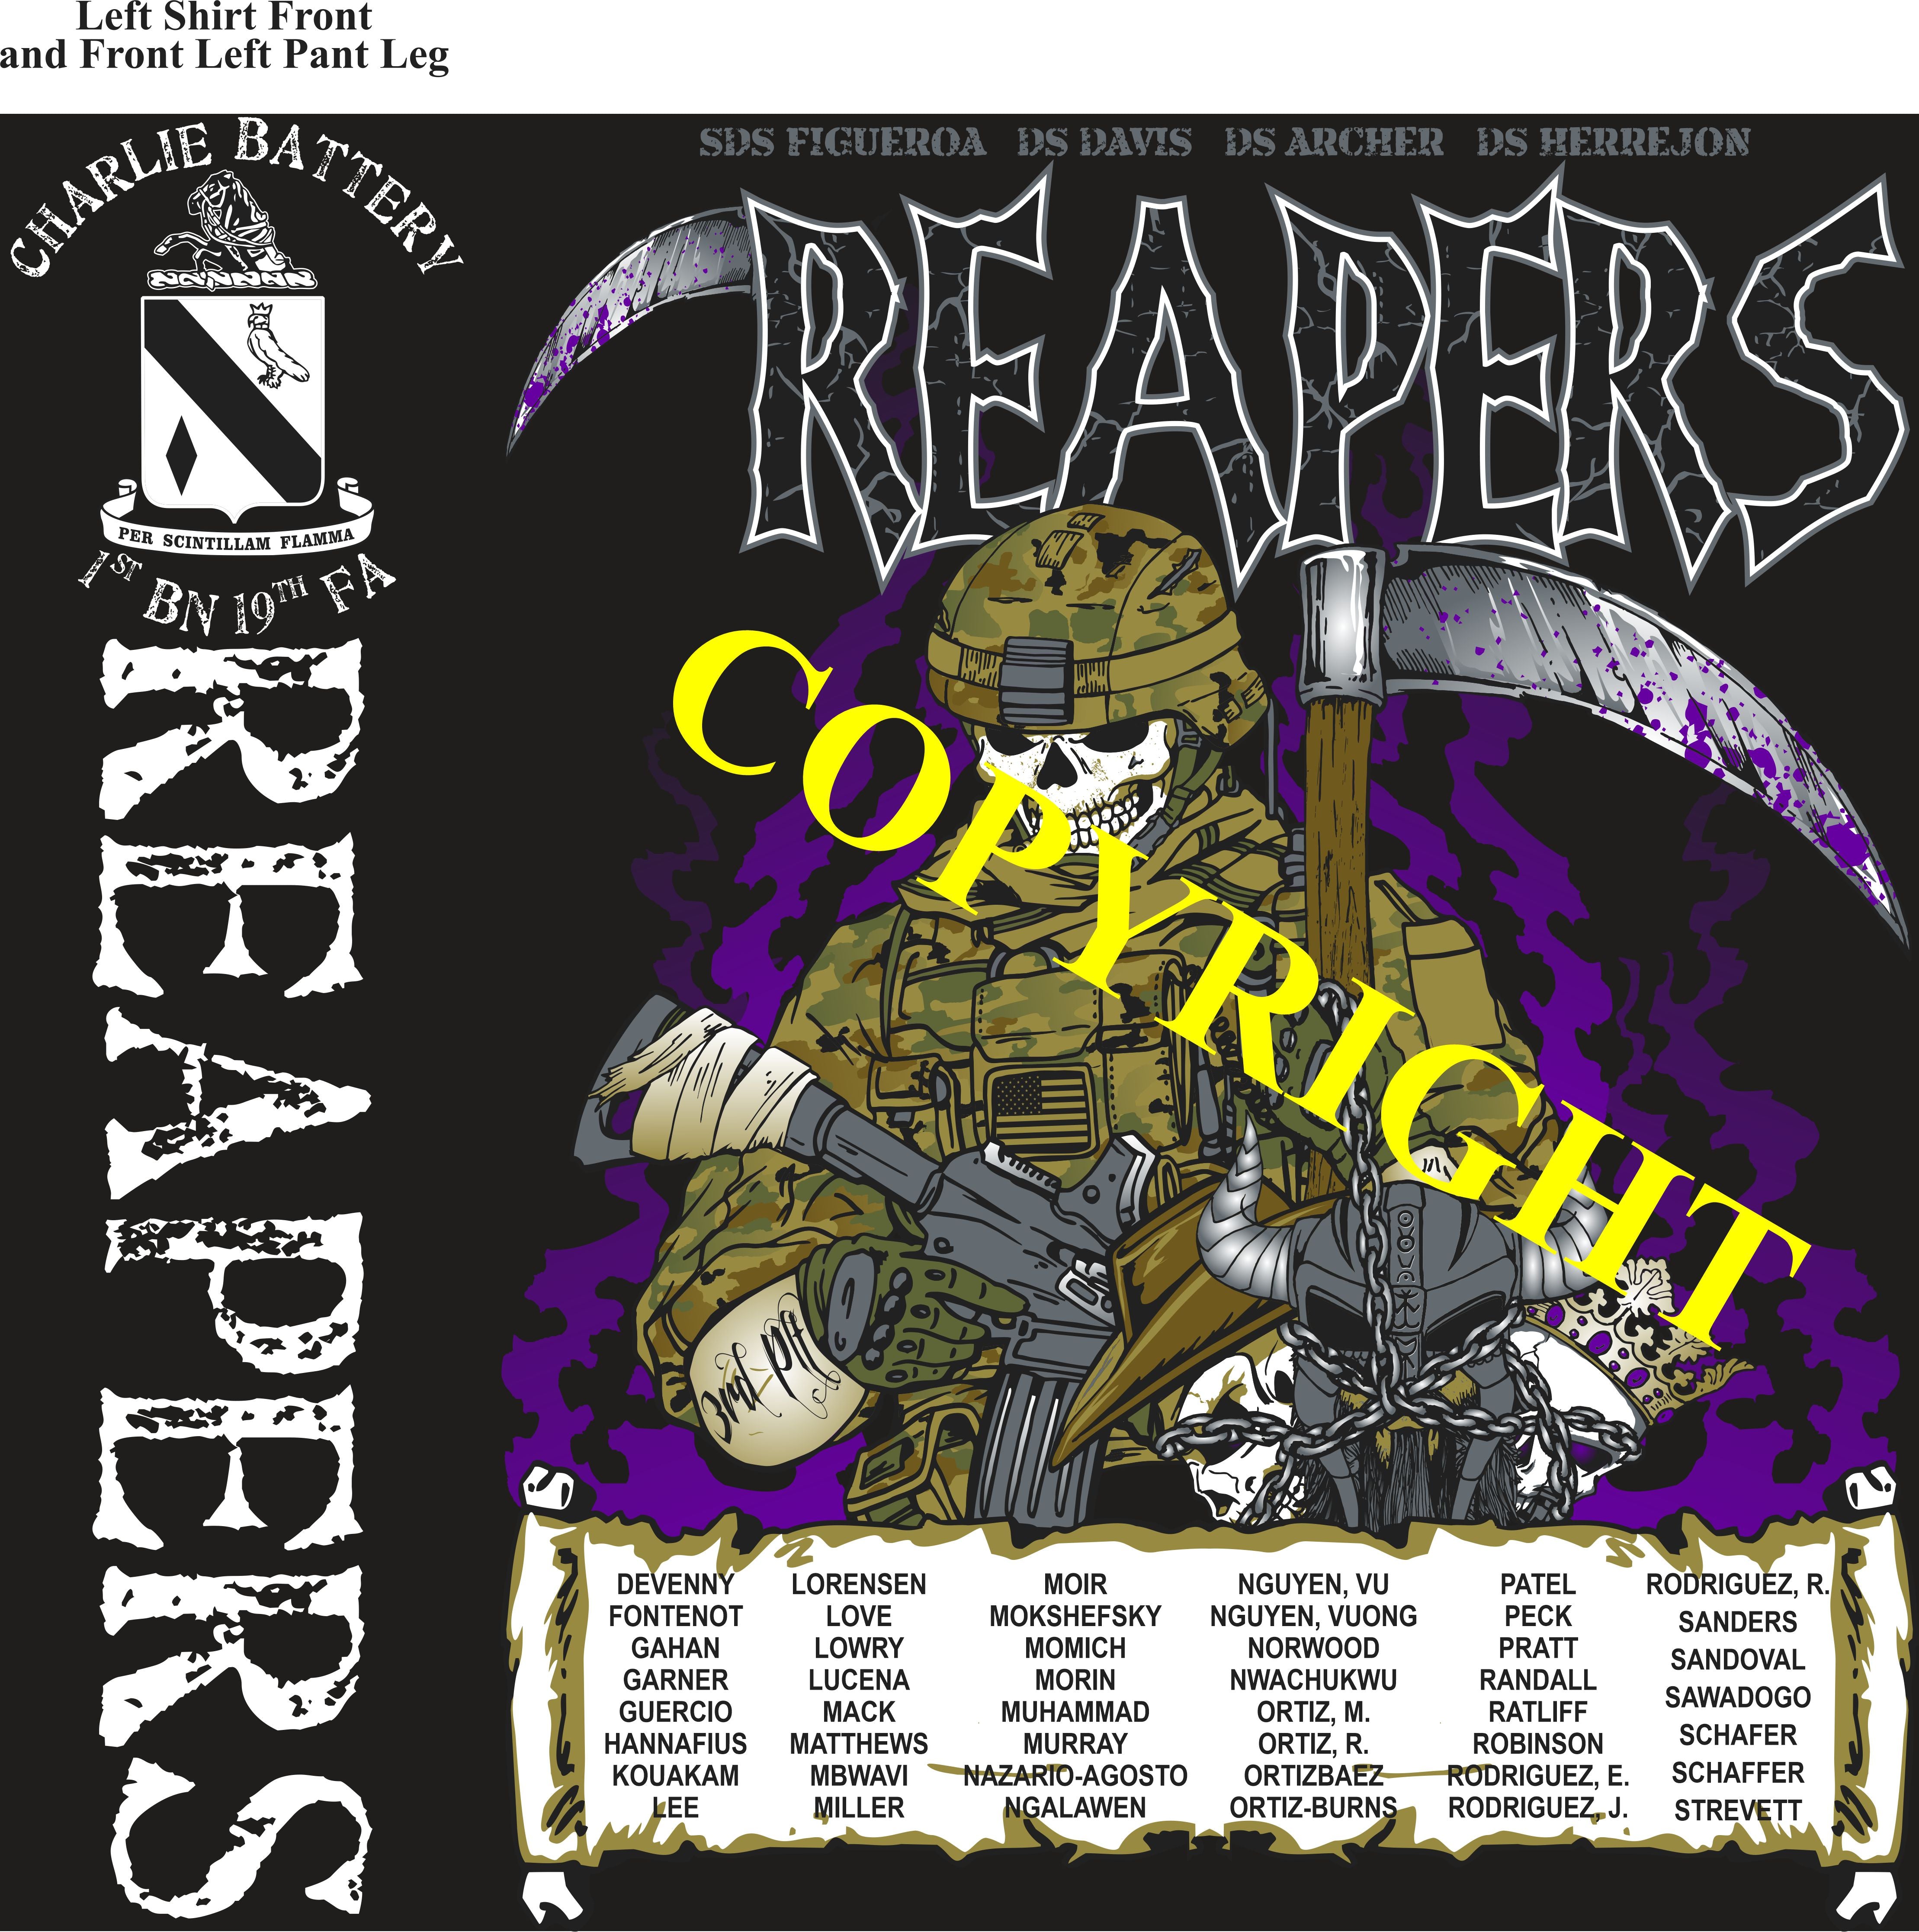 Platoon Shirts (2nd generation print) CHARLIE 1st 19th REAPERS APR 2021